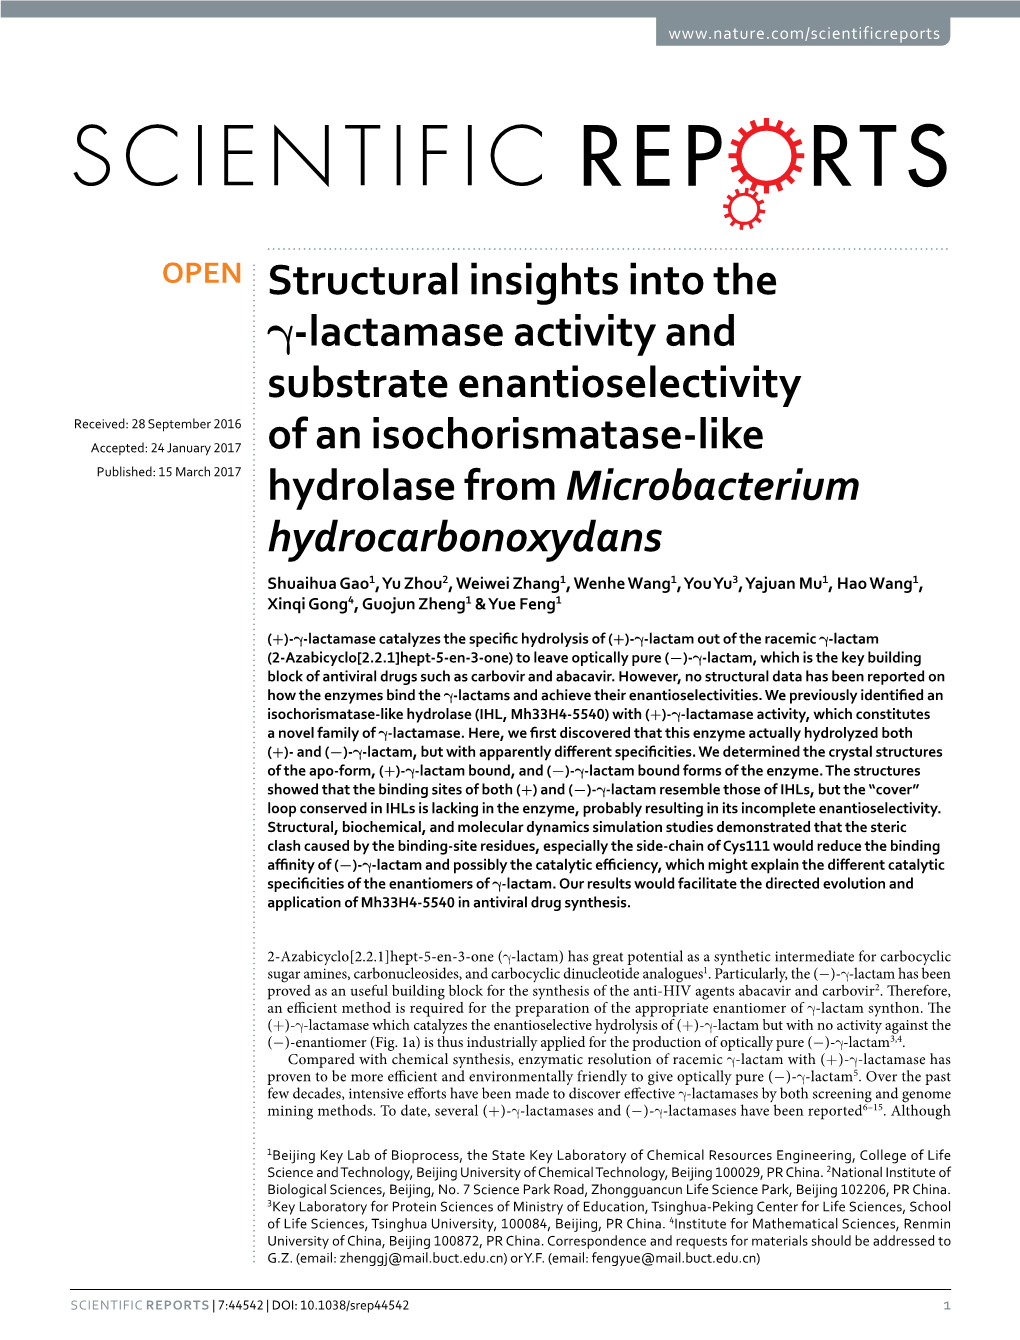 Structural Insights Into the Γ-Lactamase Activity and Substrate